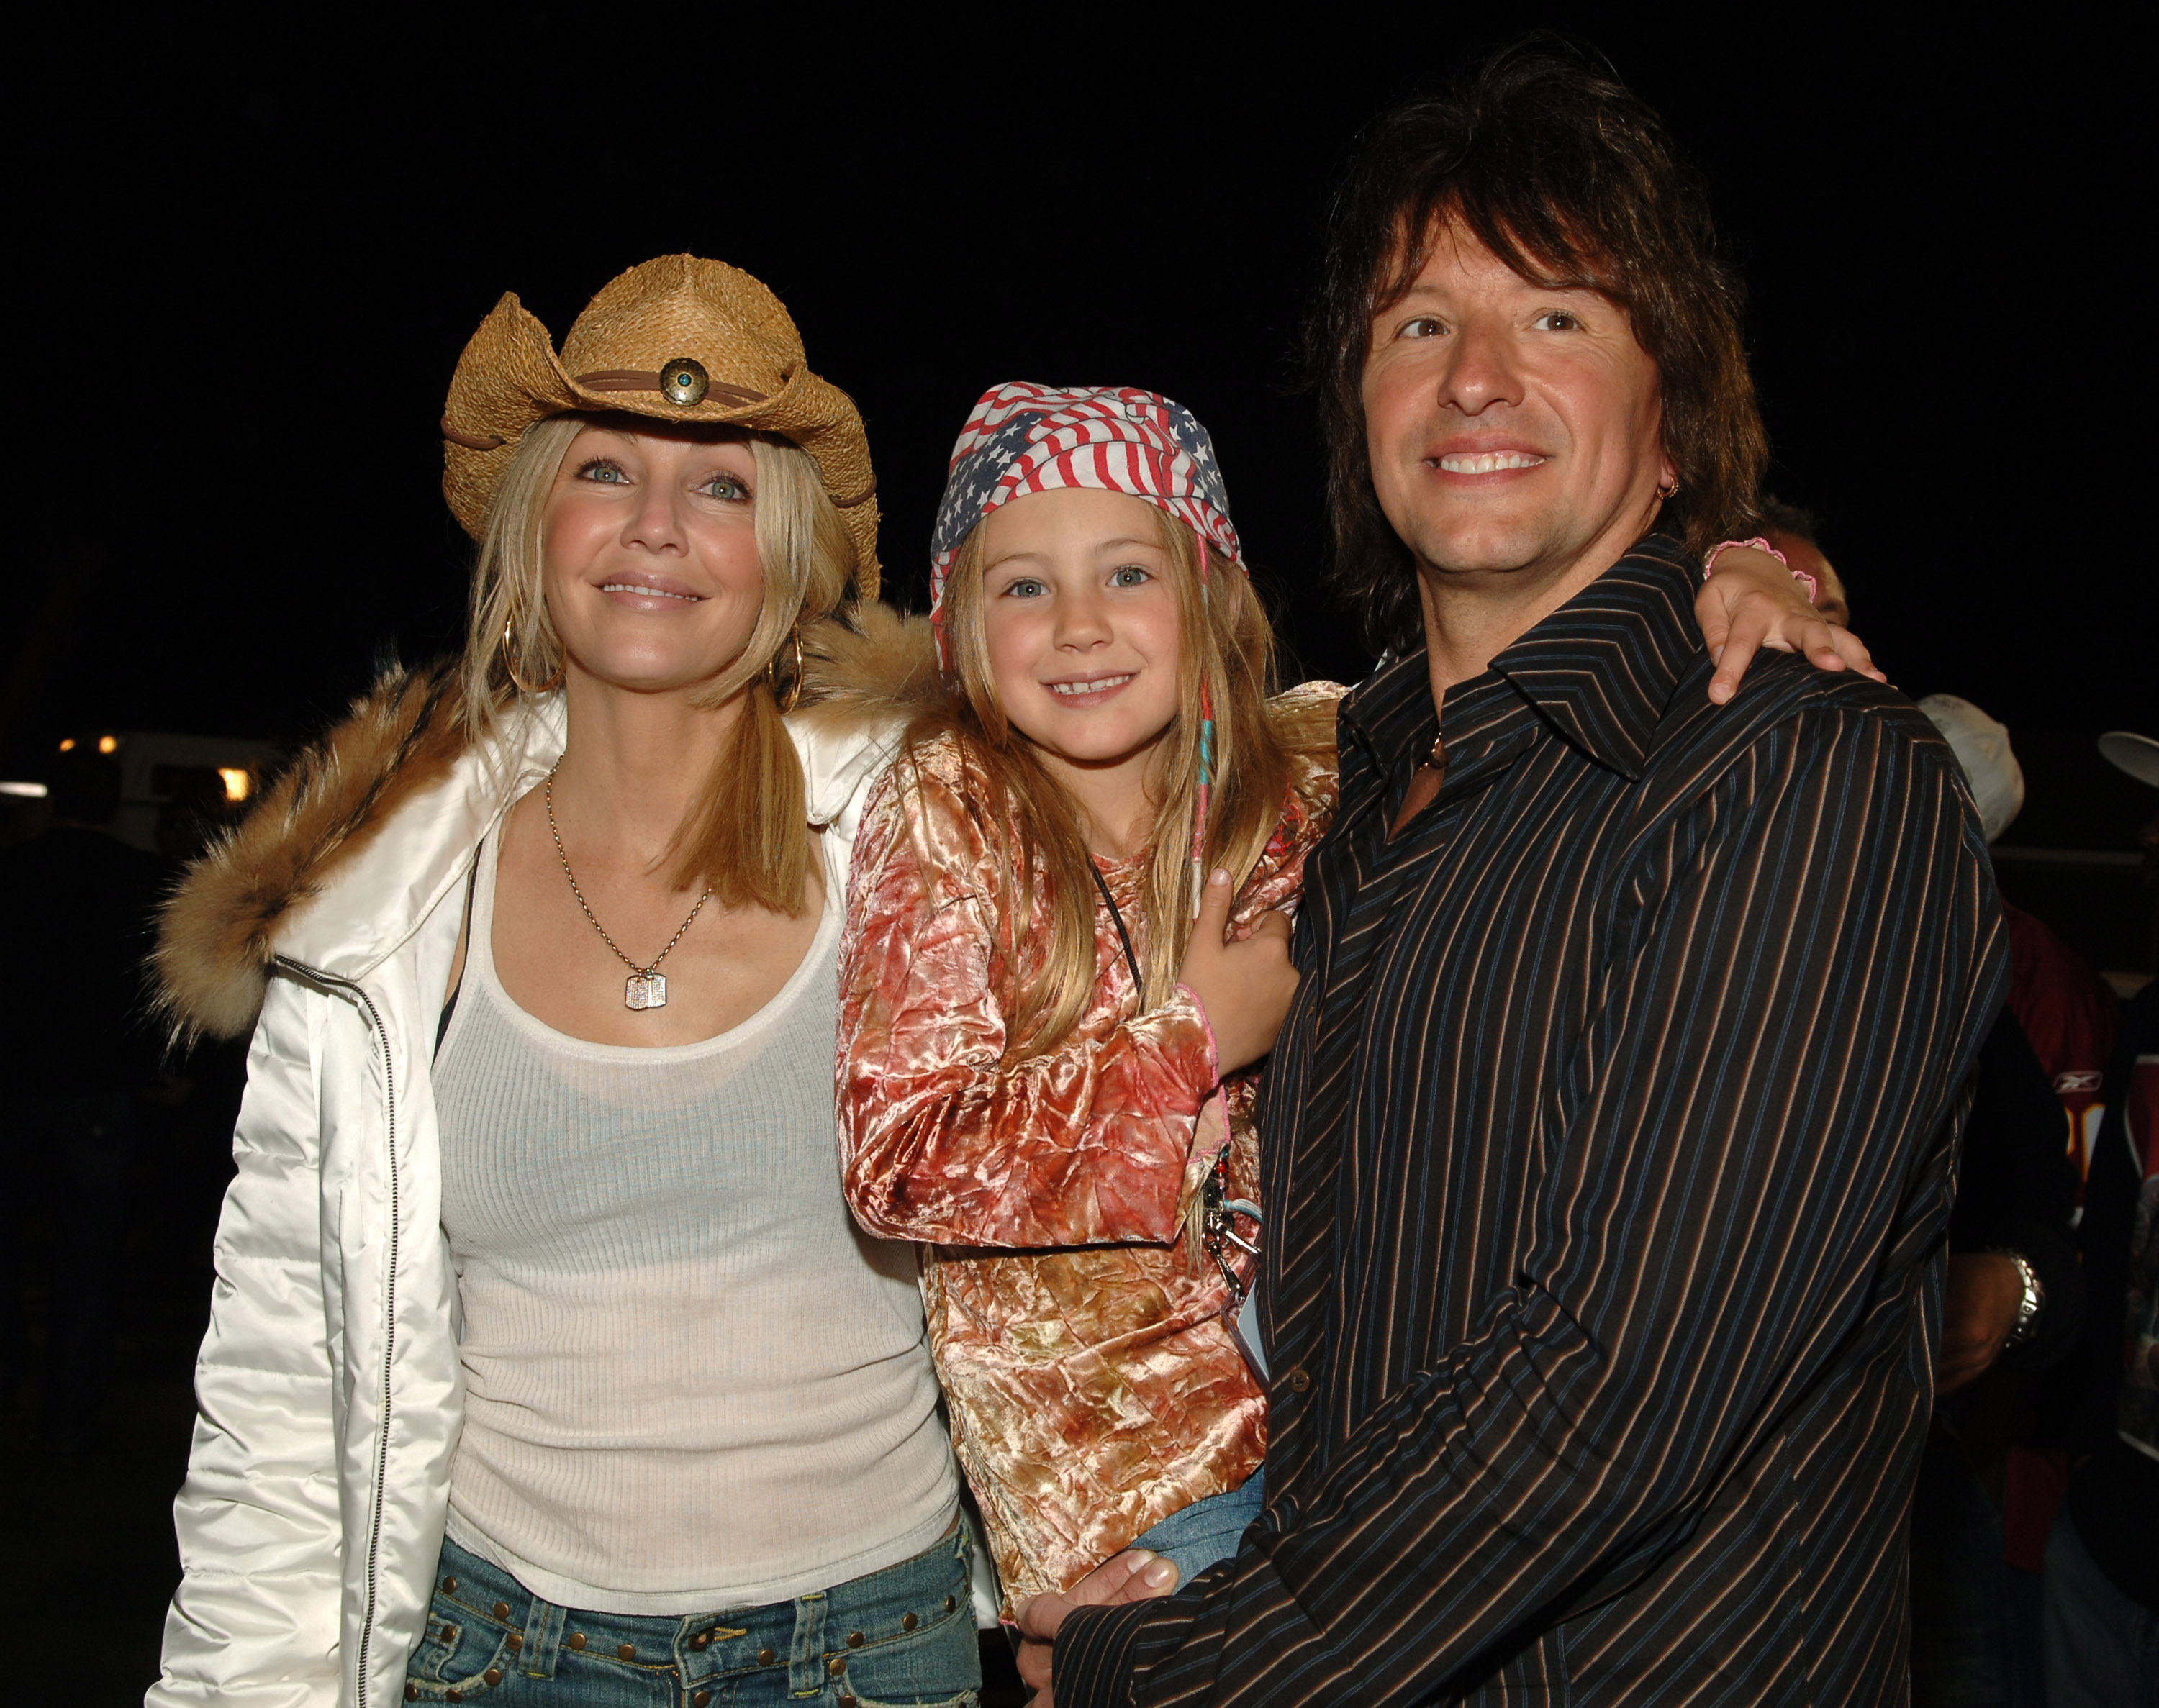 <p>Heather Locklear, then-husband Richie Sambora and their only child, a then-7-year-old Ava Sambora, attended the Rockin' the Corps Concert: An American Thank You Celebration for U.S. Marines on April 1, 2005. The "Dynasty" and "Melrose Place" actress and the Bon Jovi guitarist split the following year. </p>